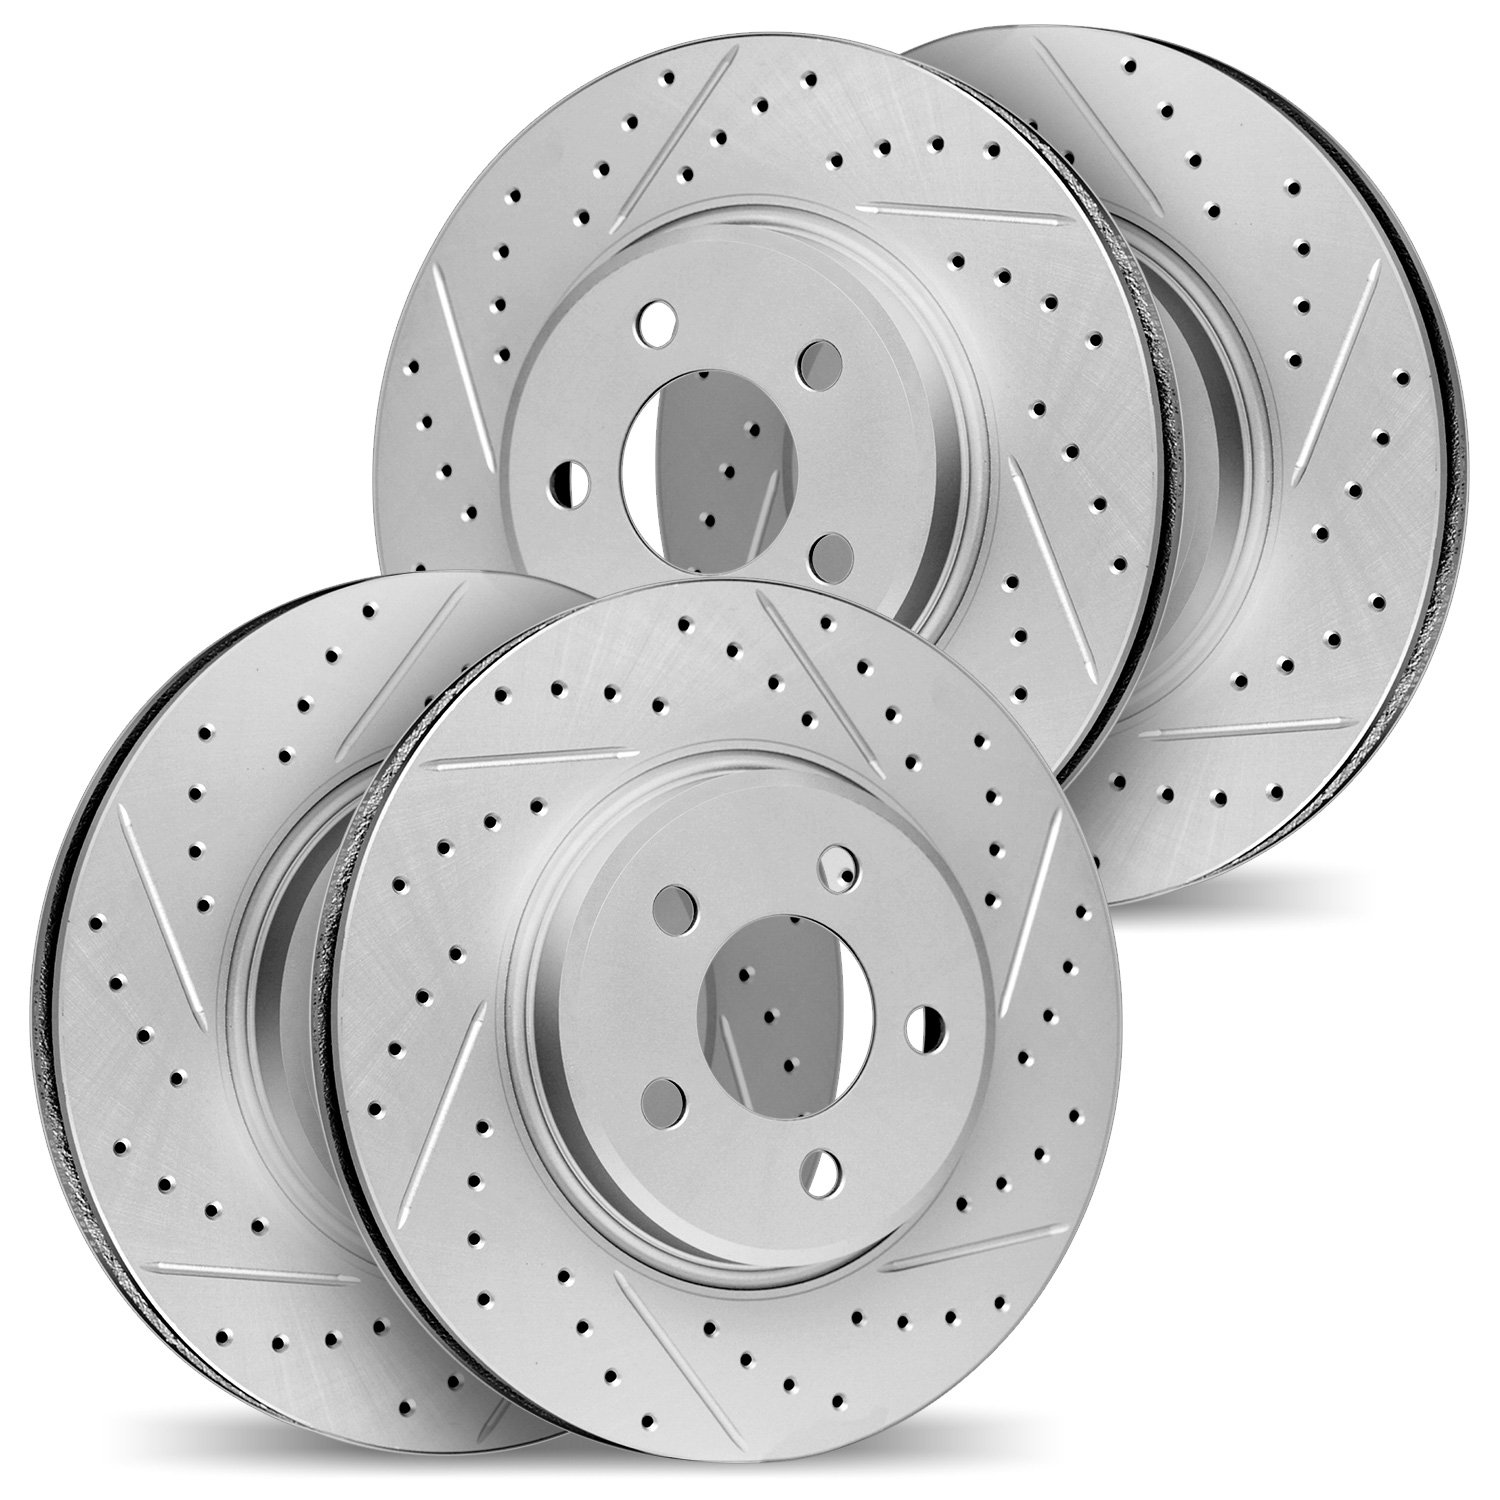 2004-13002 Geoperformance Drilled/Slotted Brake Rotors, Fits Select Multiple Makes/Models, Position: Front and Rear